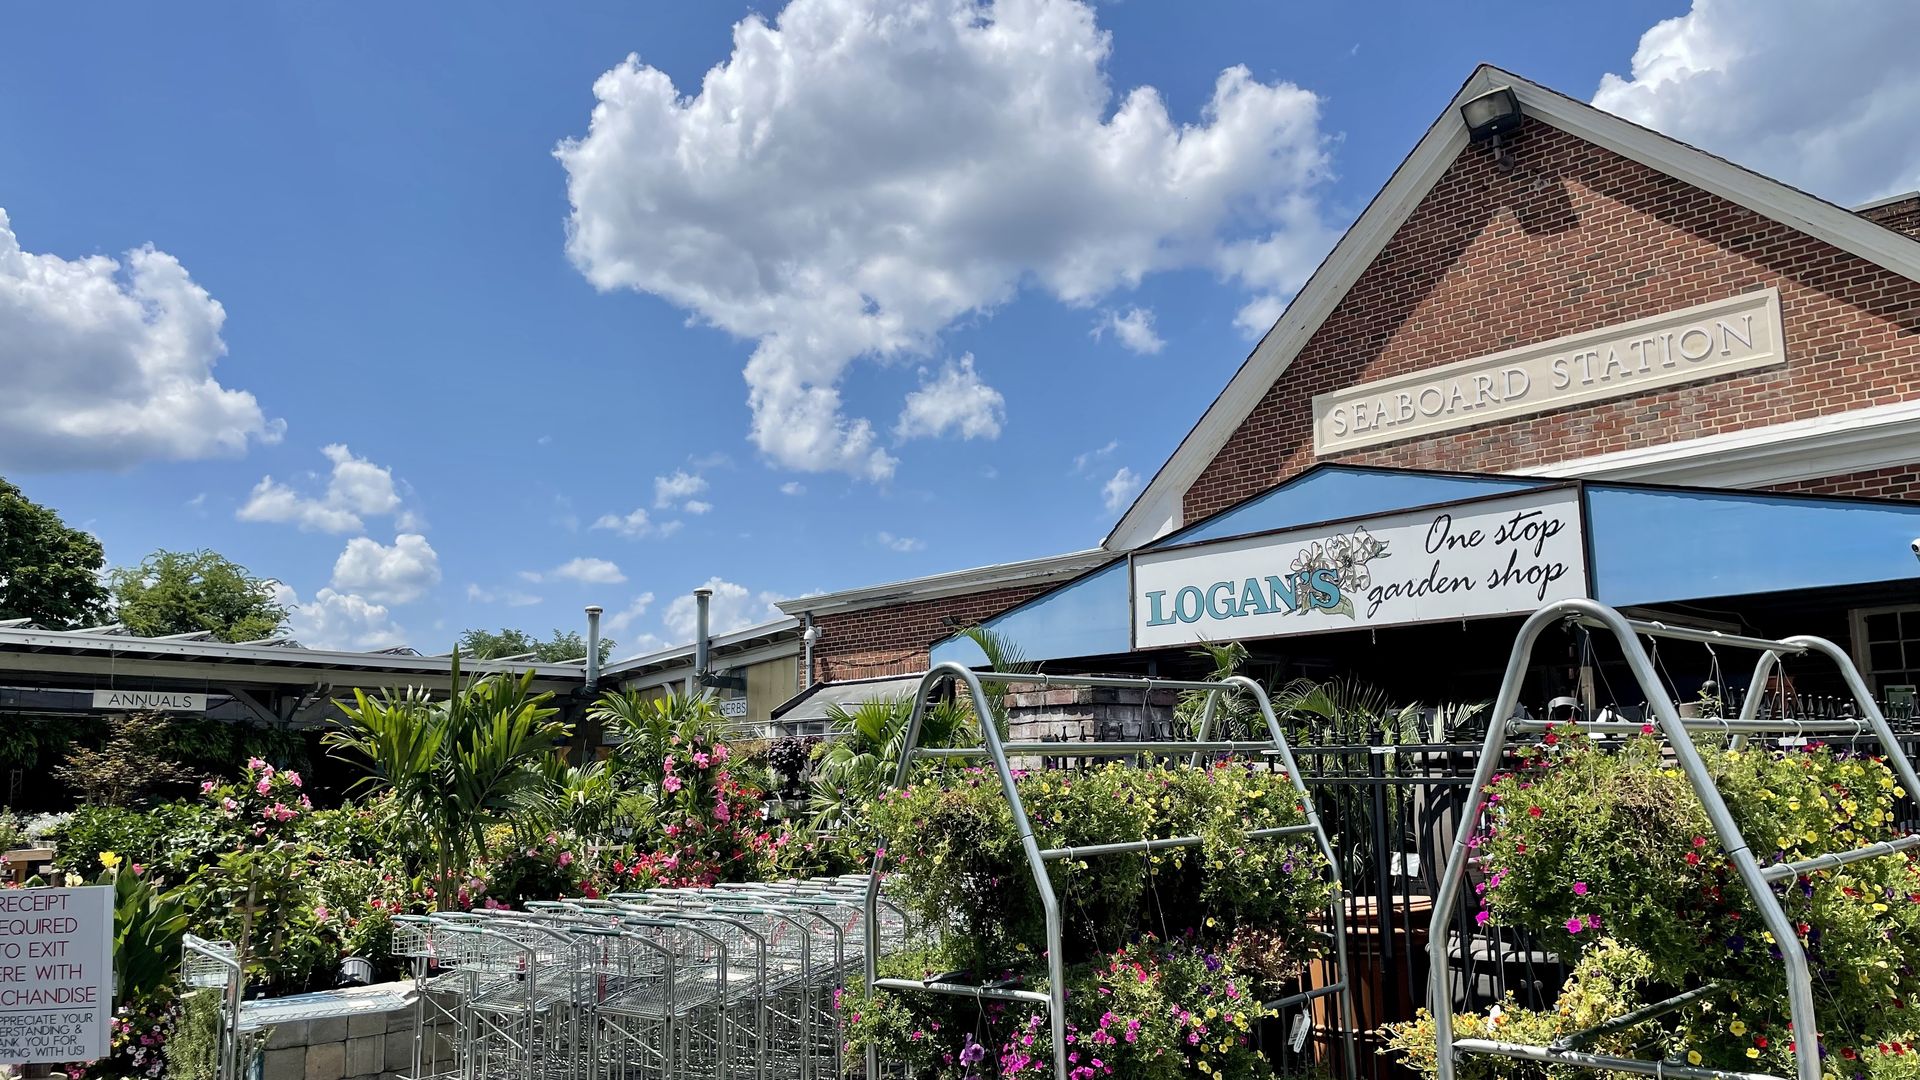 Logan's One Stop Garden Shop at Seaboard station